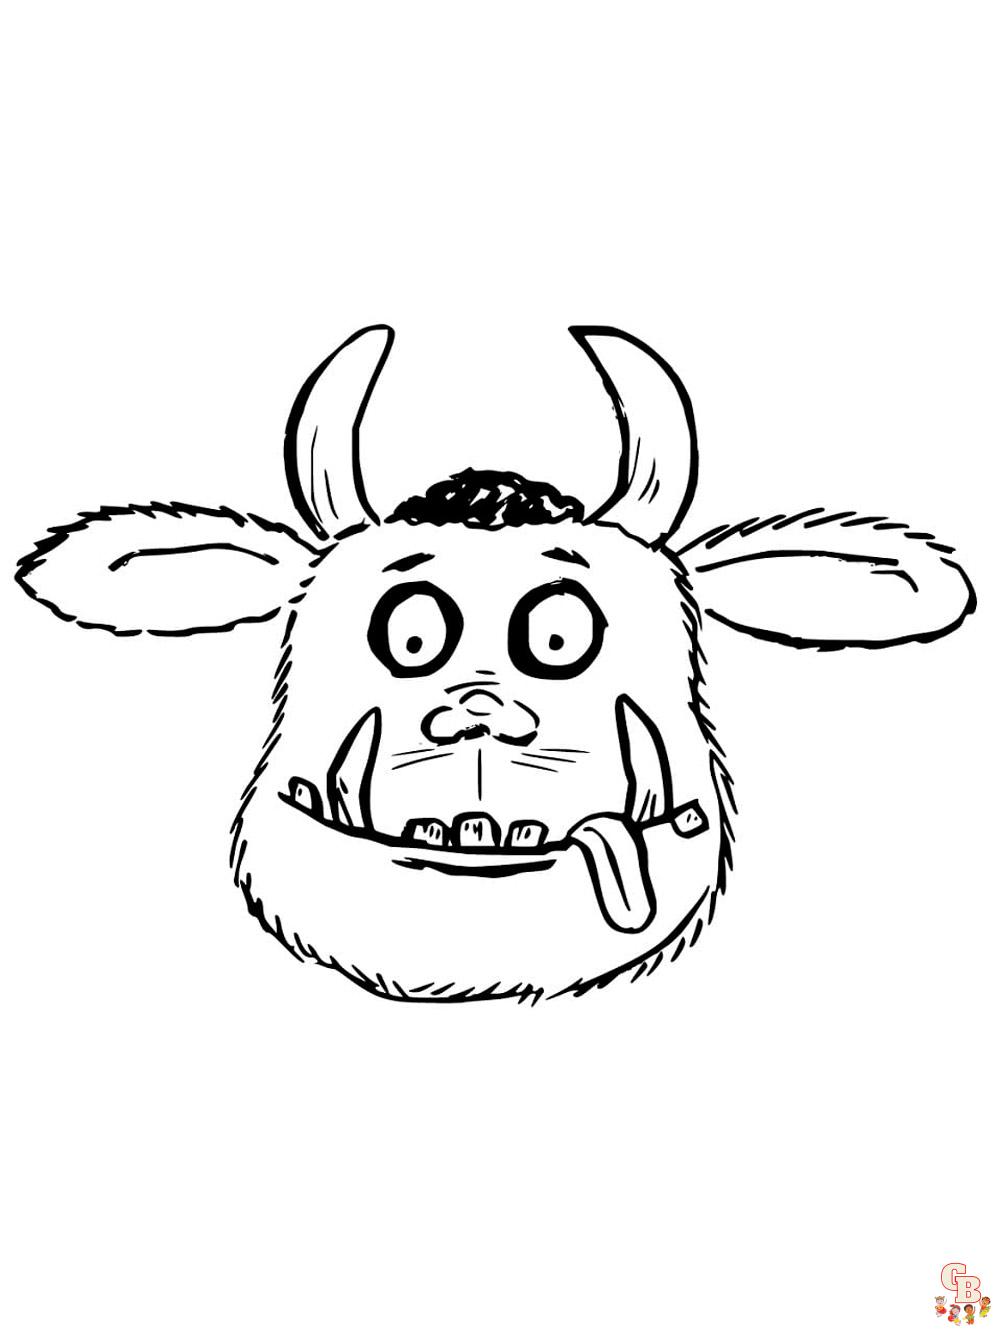 Gruffalo Coloring Pages 7